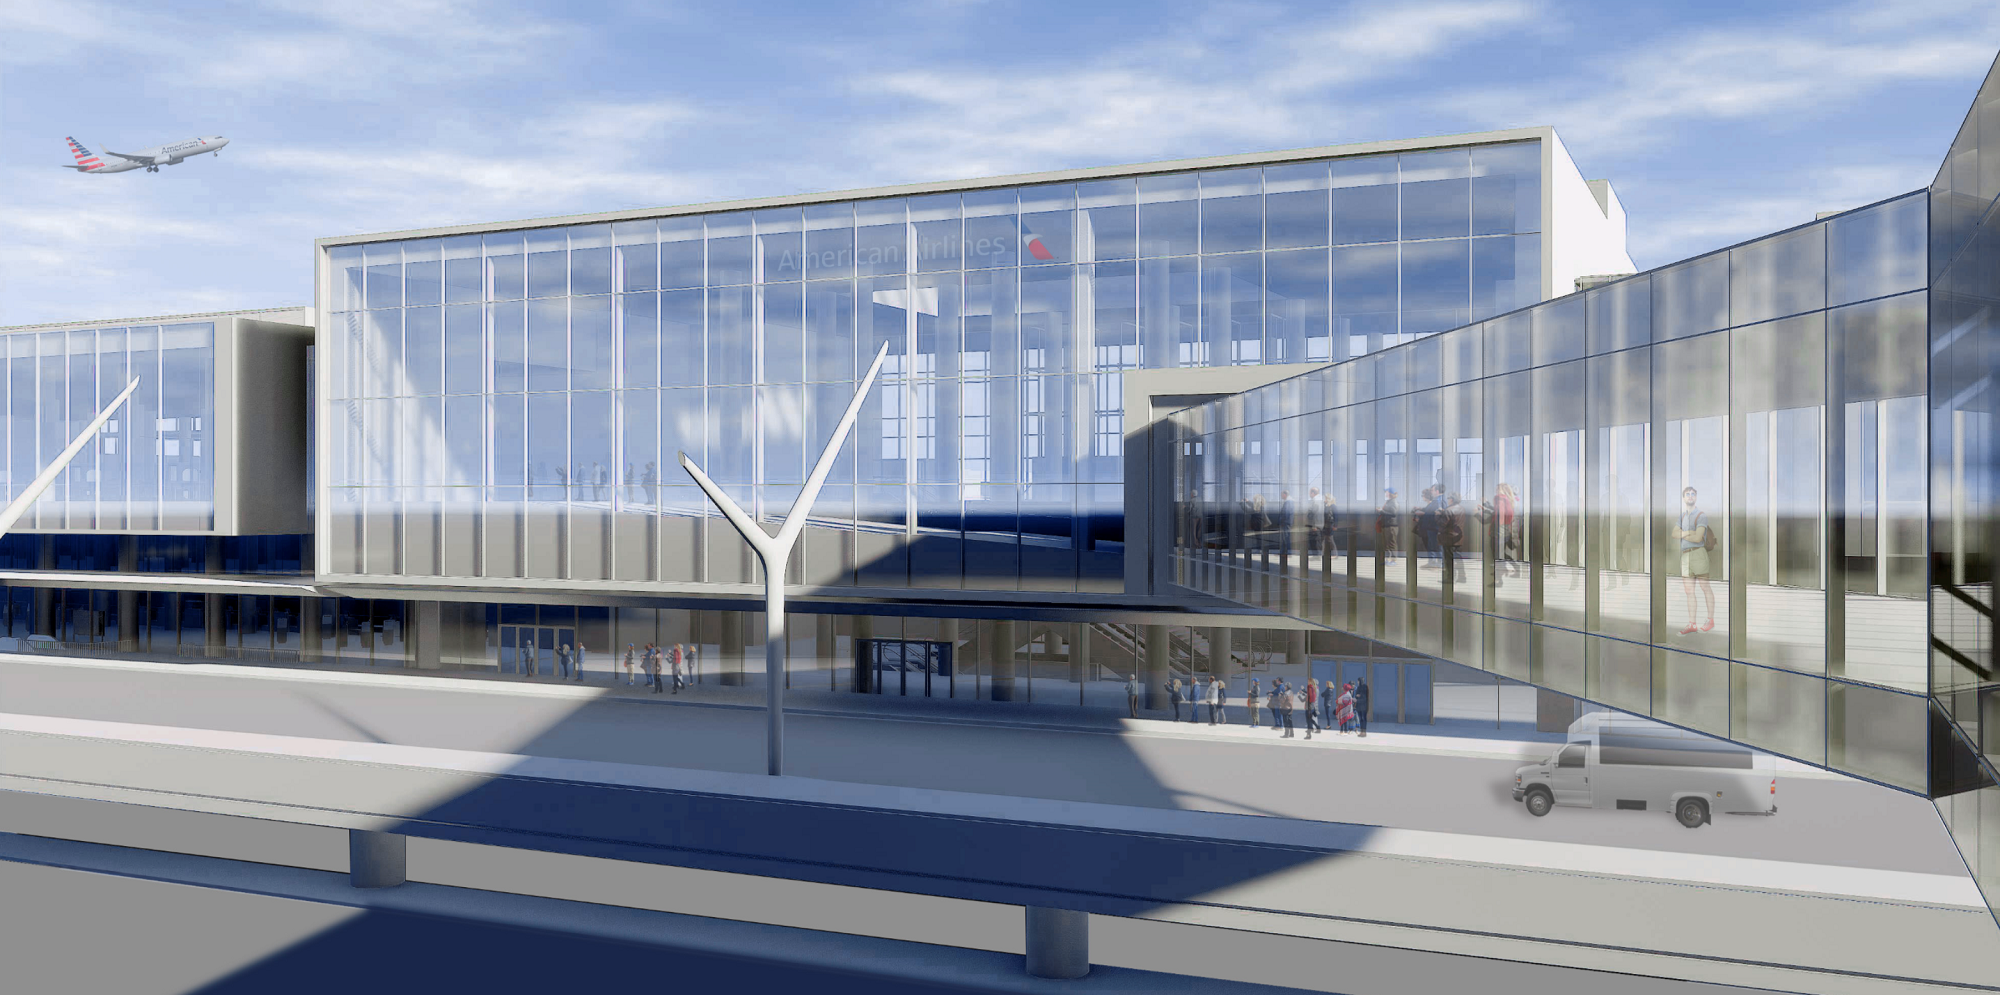 American Airlines LAX renovation rendering